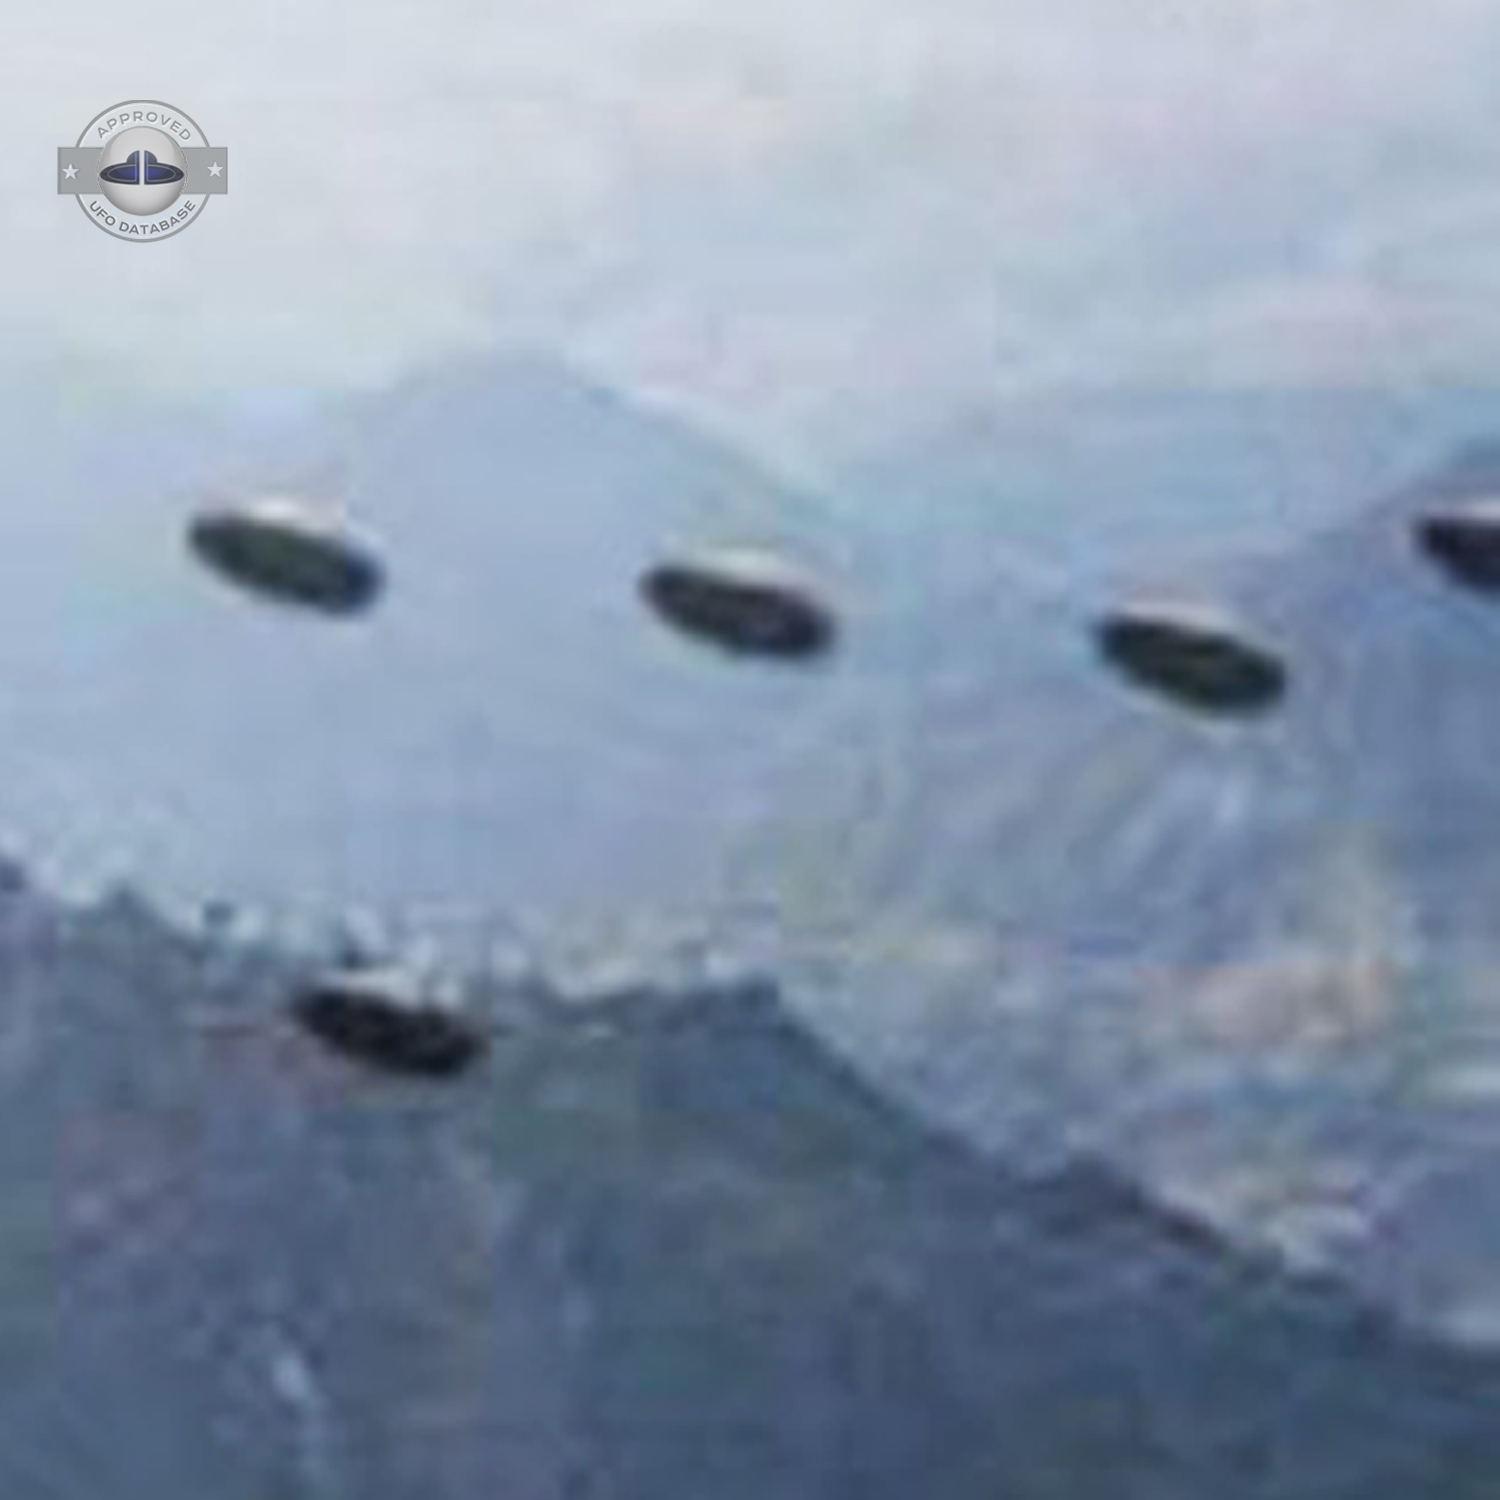 Fleet of 5 UFOs flying in precise formation Hills of Sombaria Gangtok UFO Picture #202-6